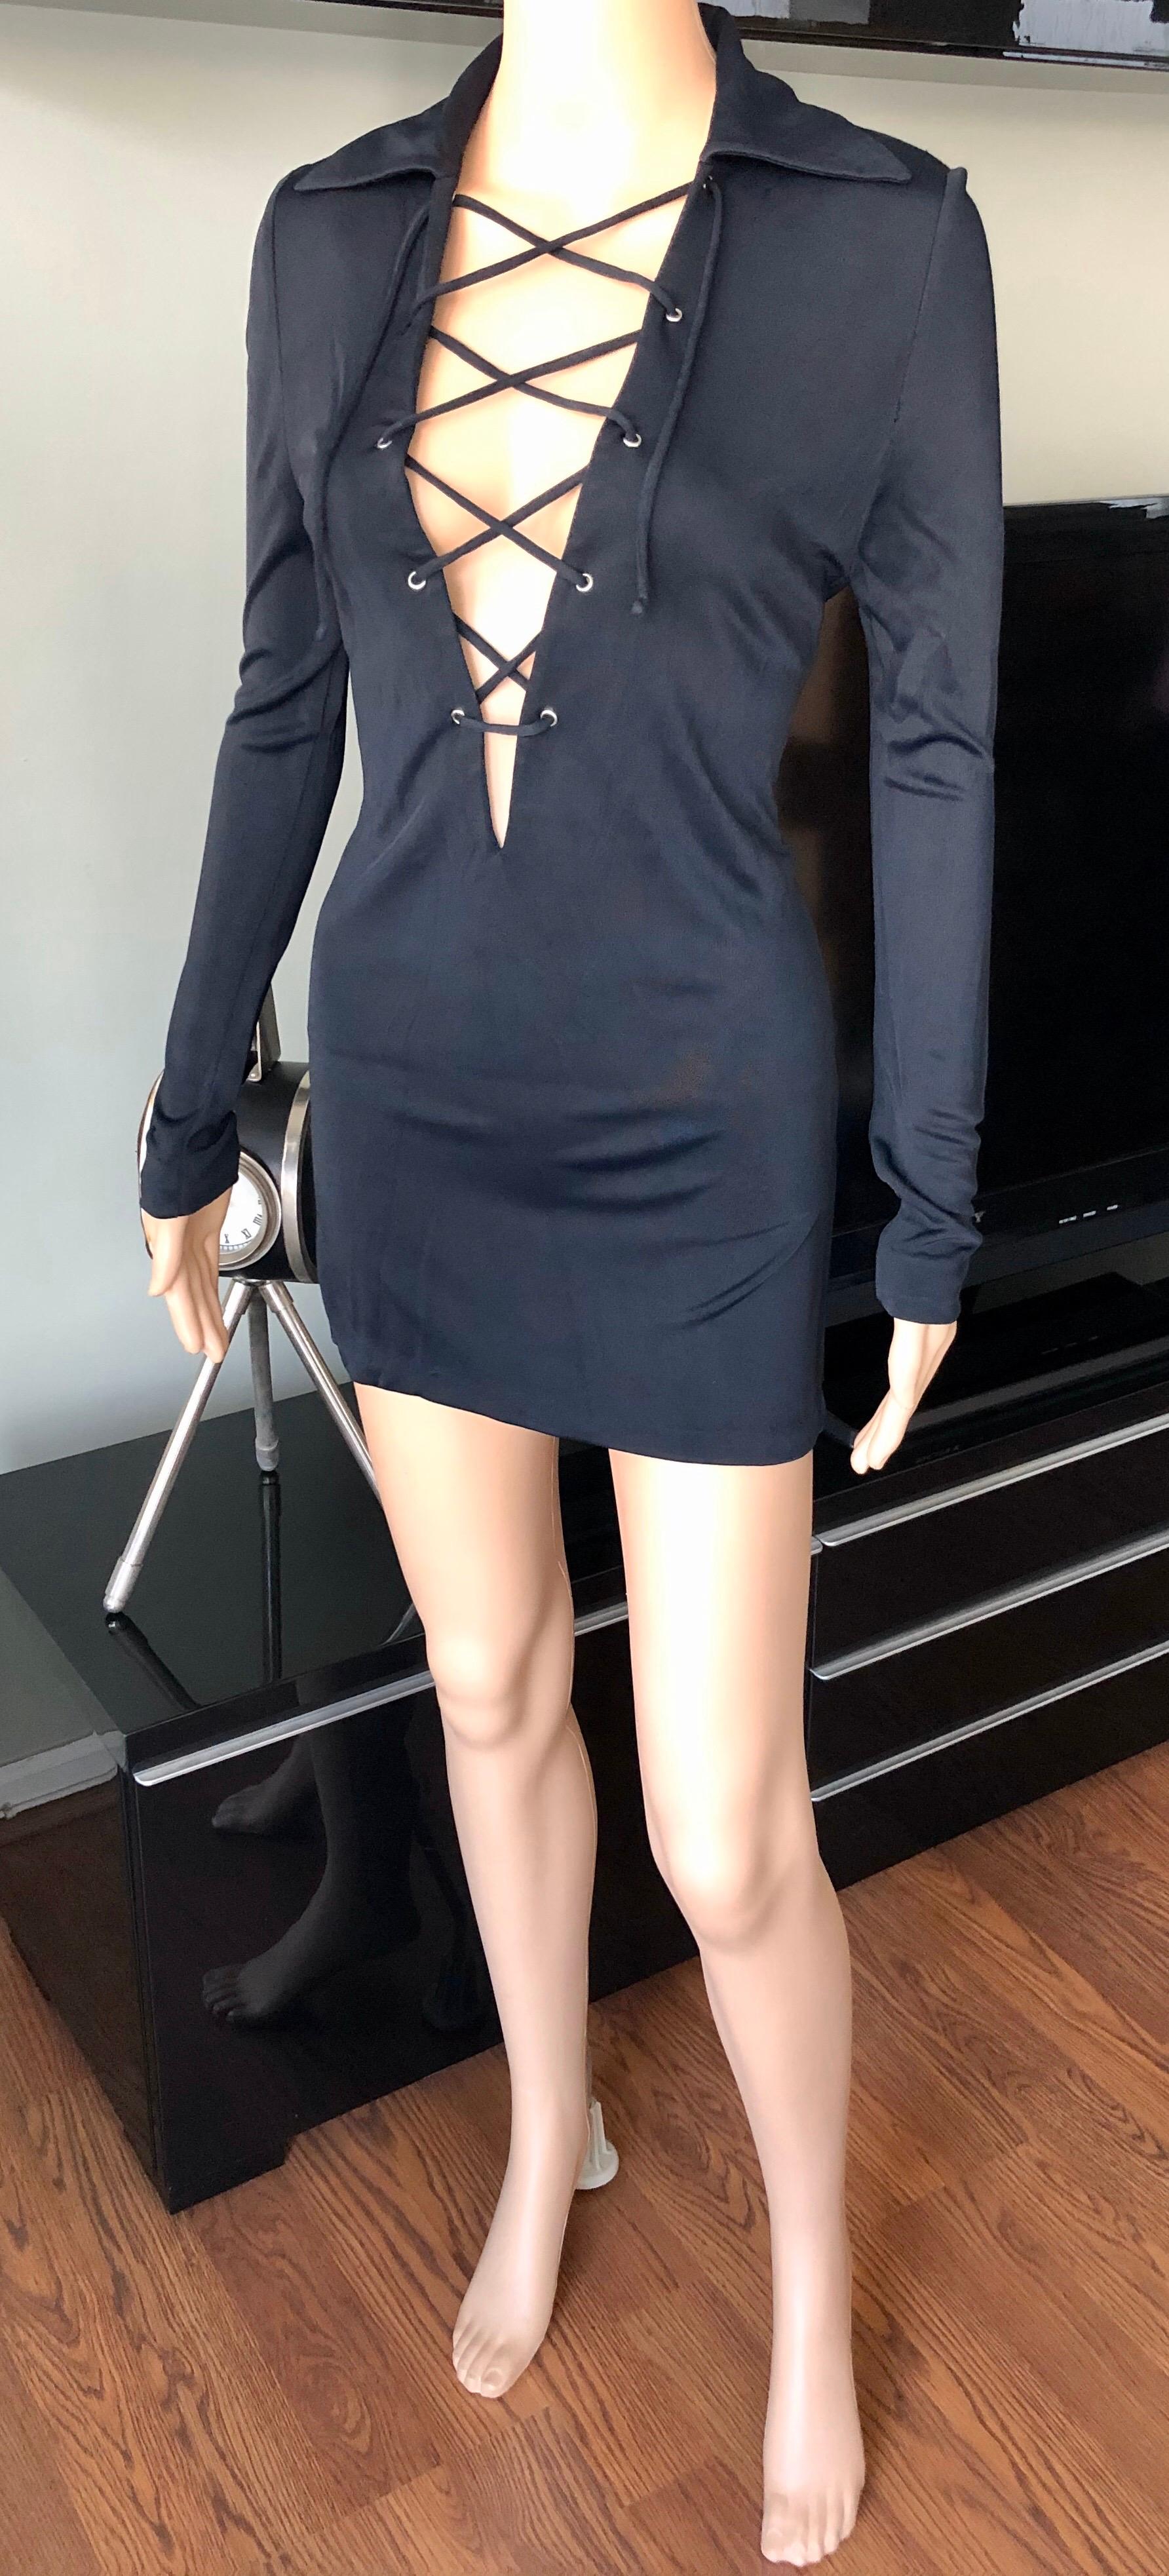 Women's Tom Ford for Gucci S/S 1996 Plunging Lace-Up Black Tunic Micro Mini Dress